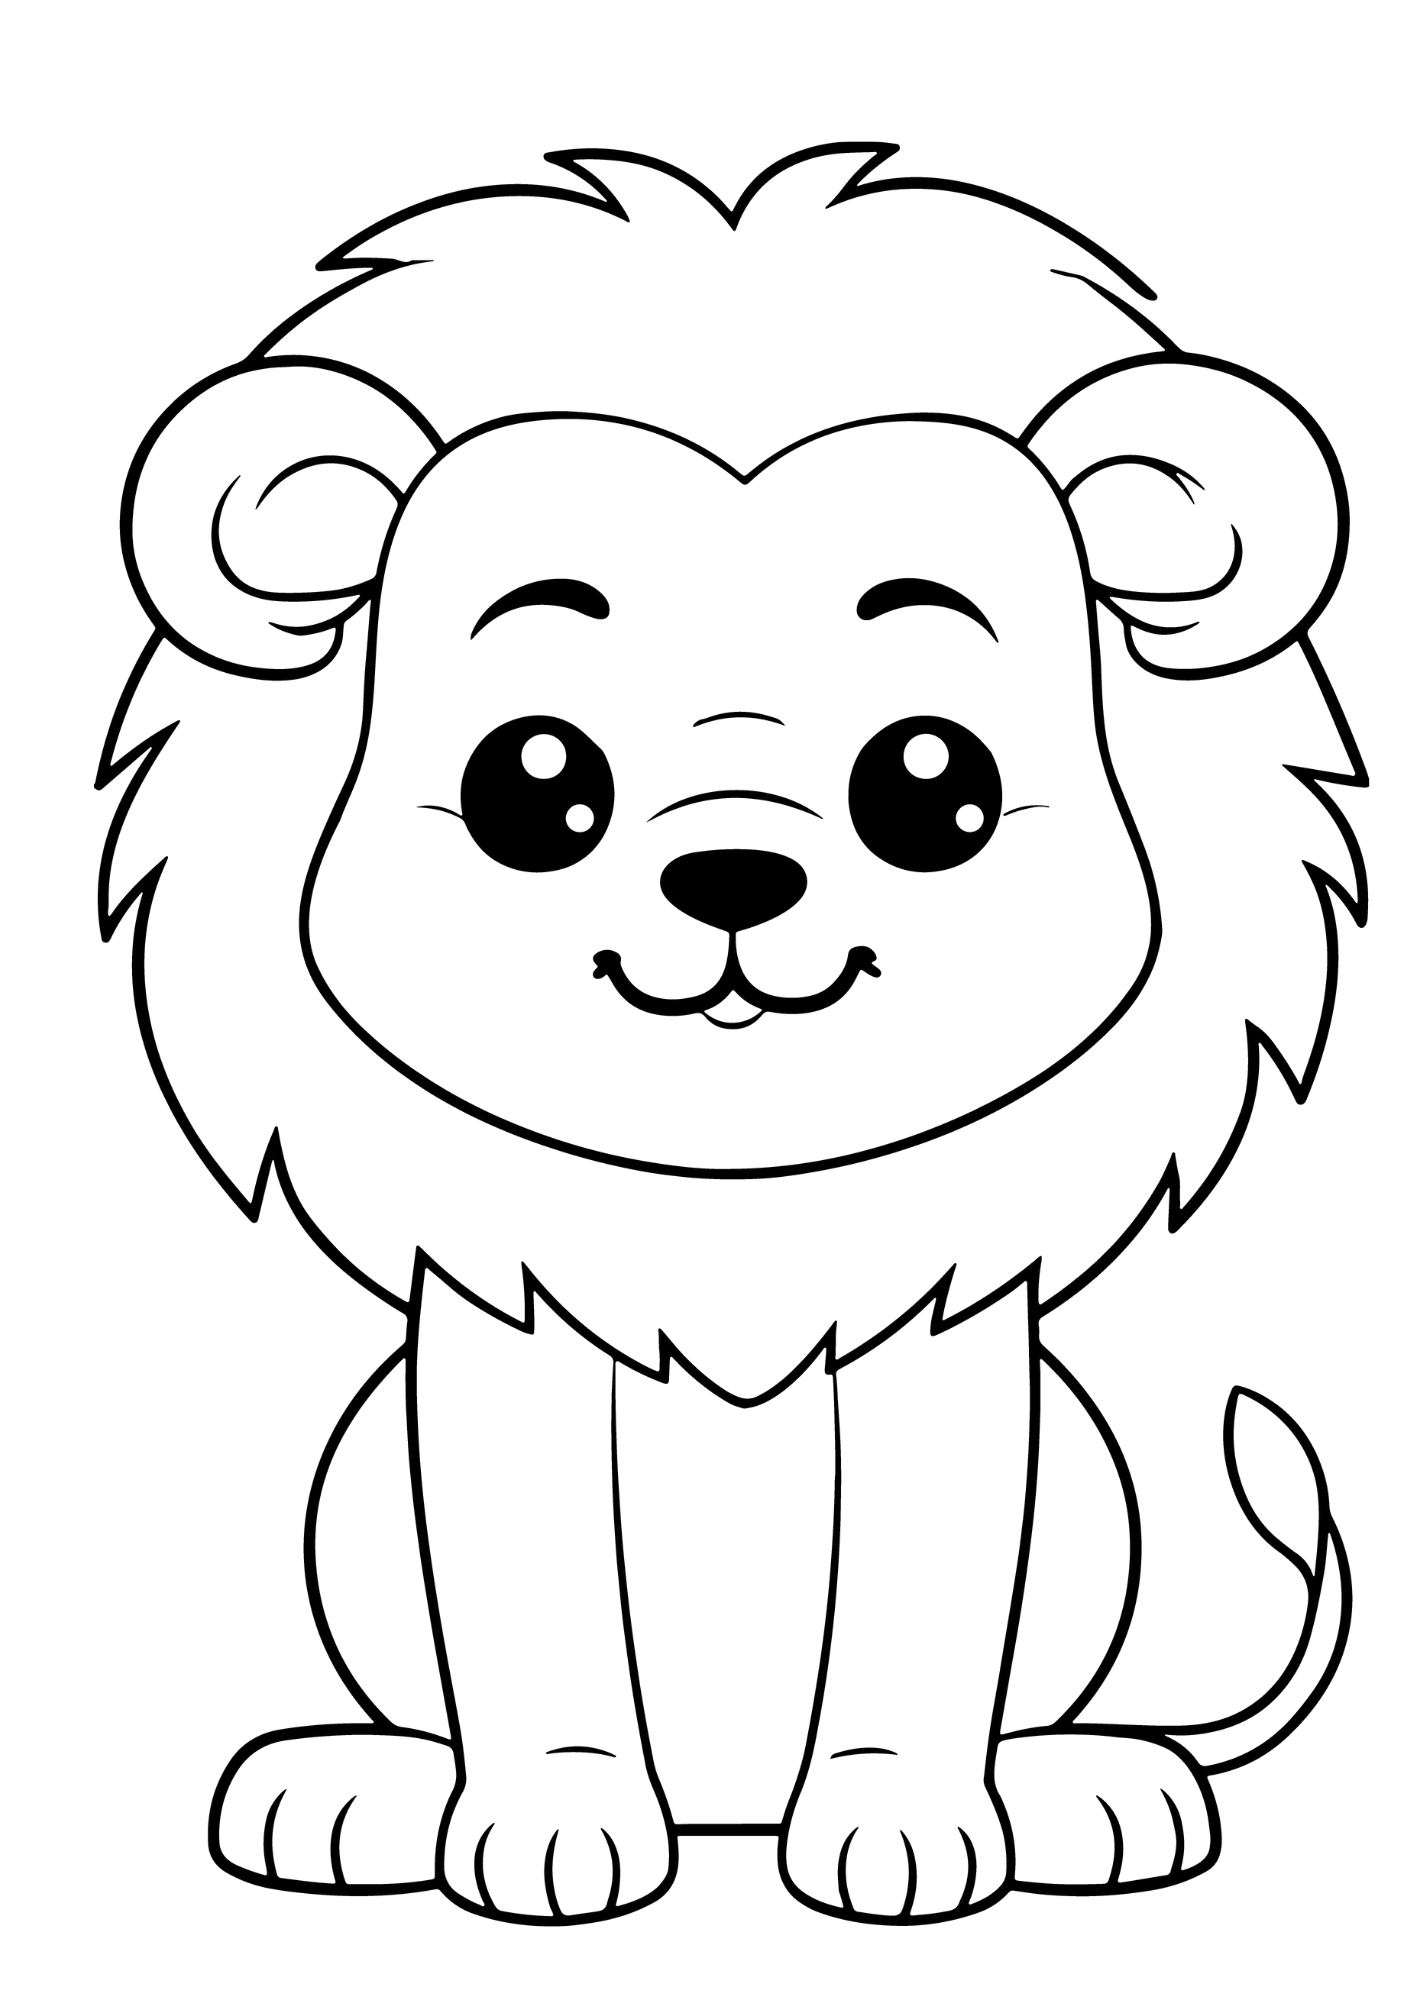 Lion Printable For Children Coloring Page